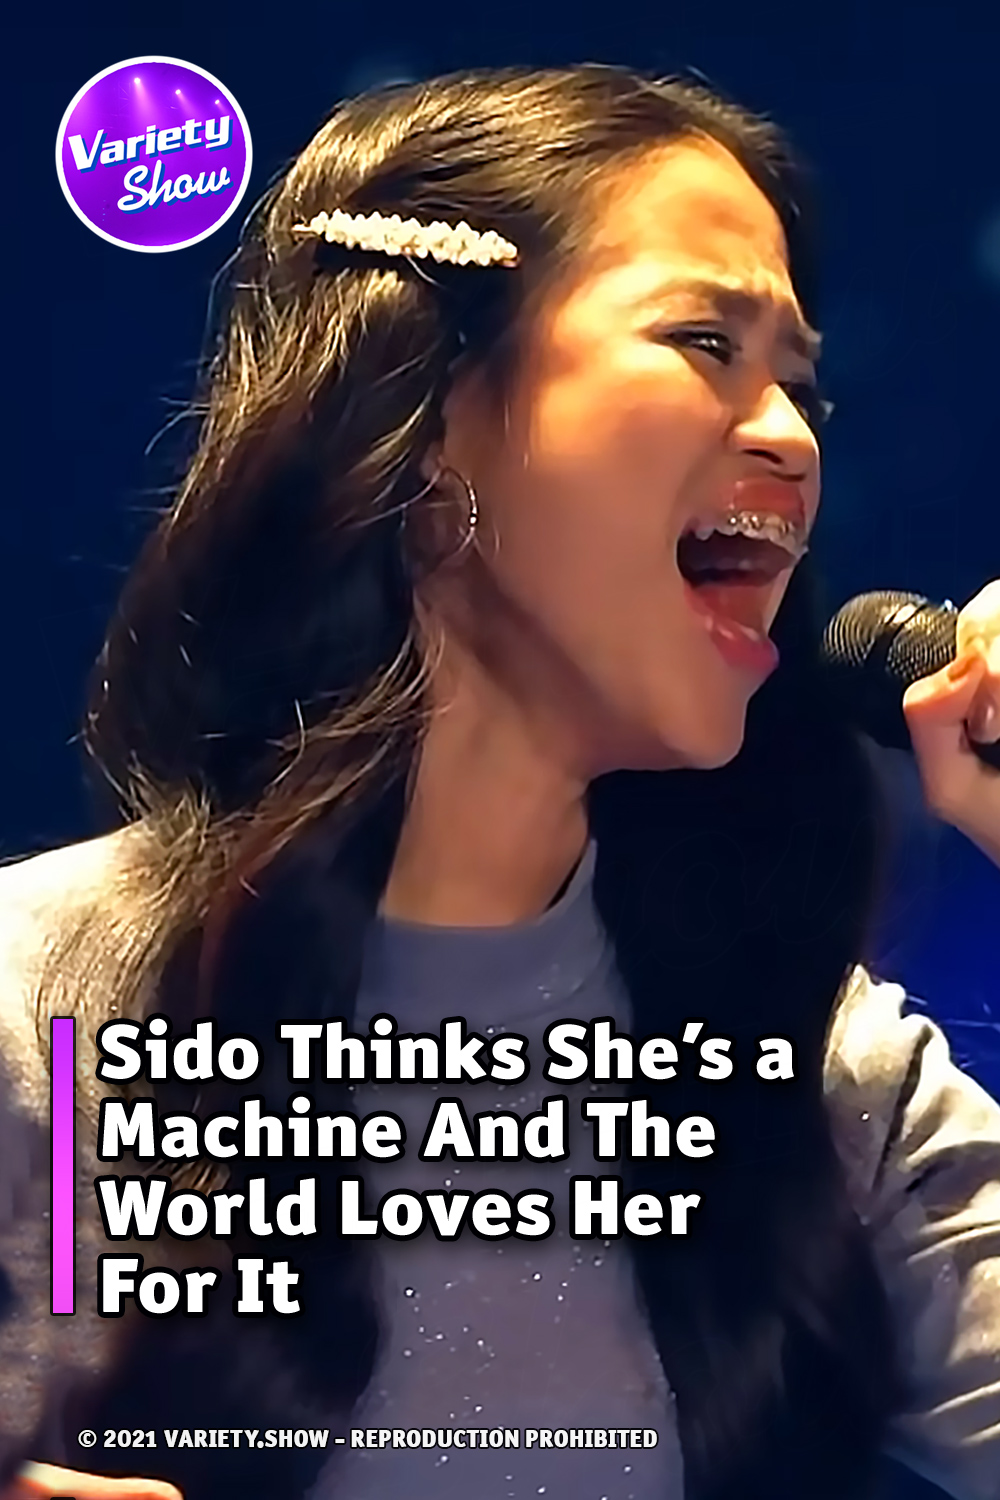 Sido Thinks She’s a Machine And The World Loves Her For It